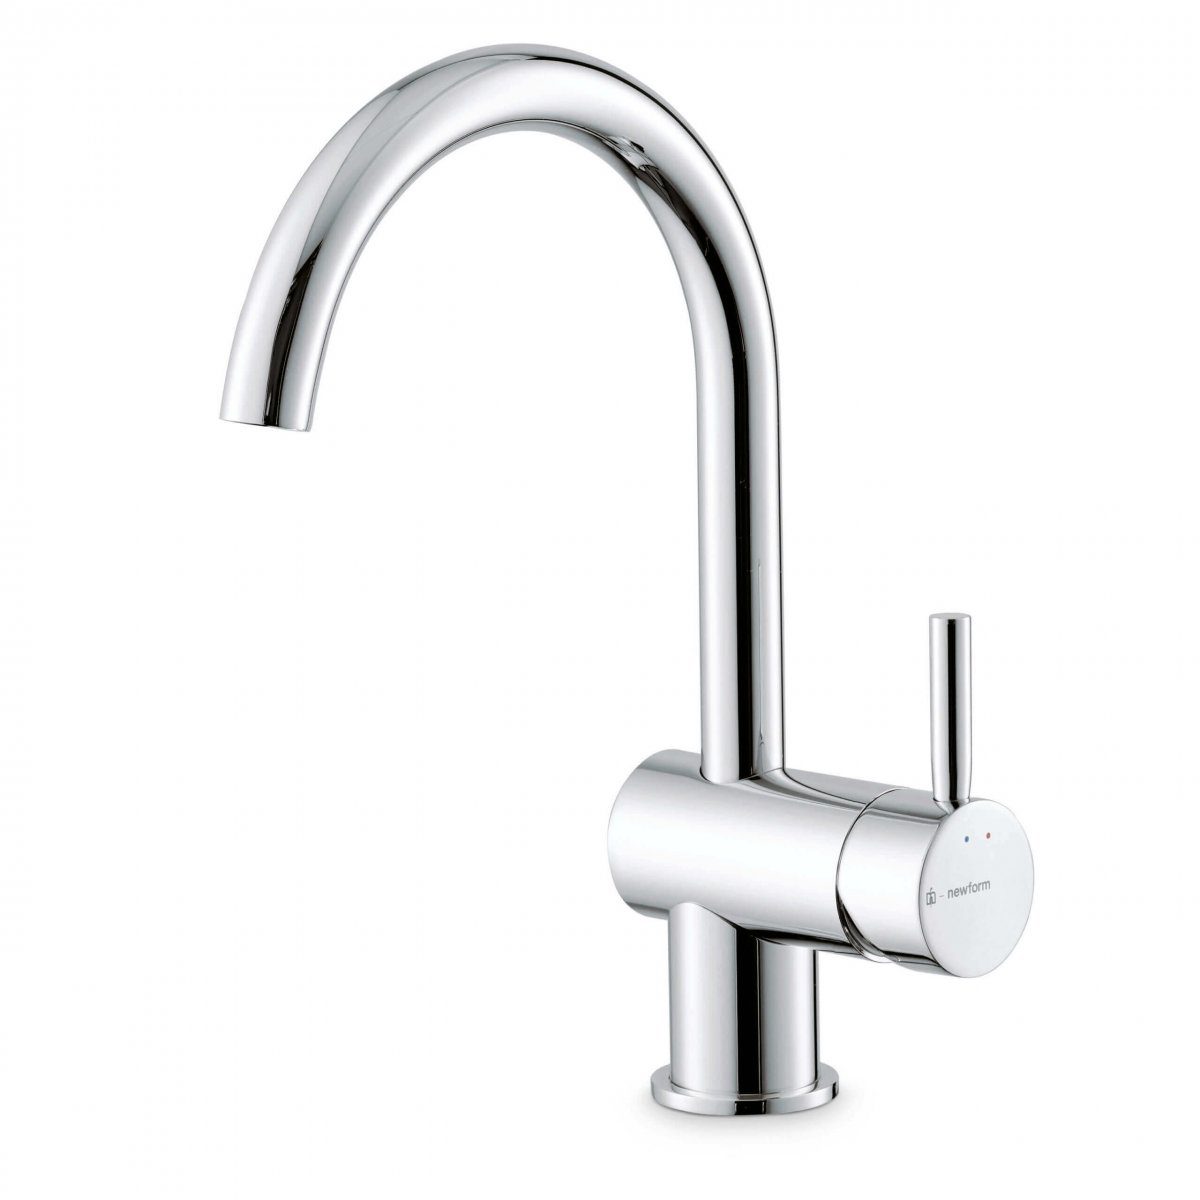 708122_N Blink Basin Mixer (with swivel spout)_Stiles_Product_Image